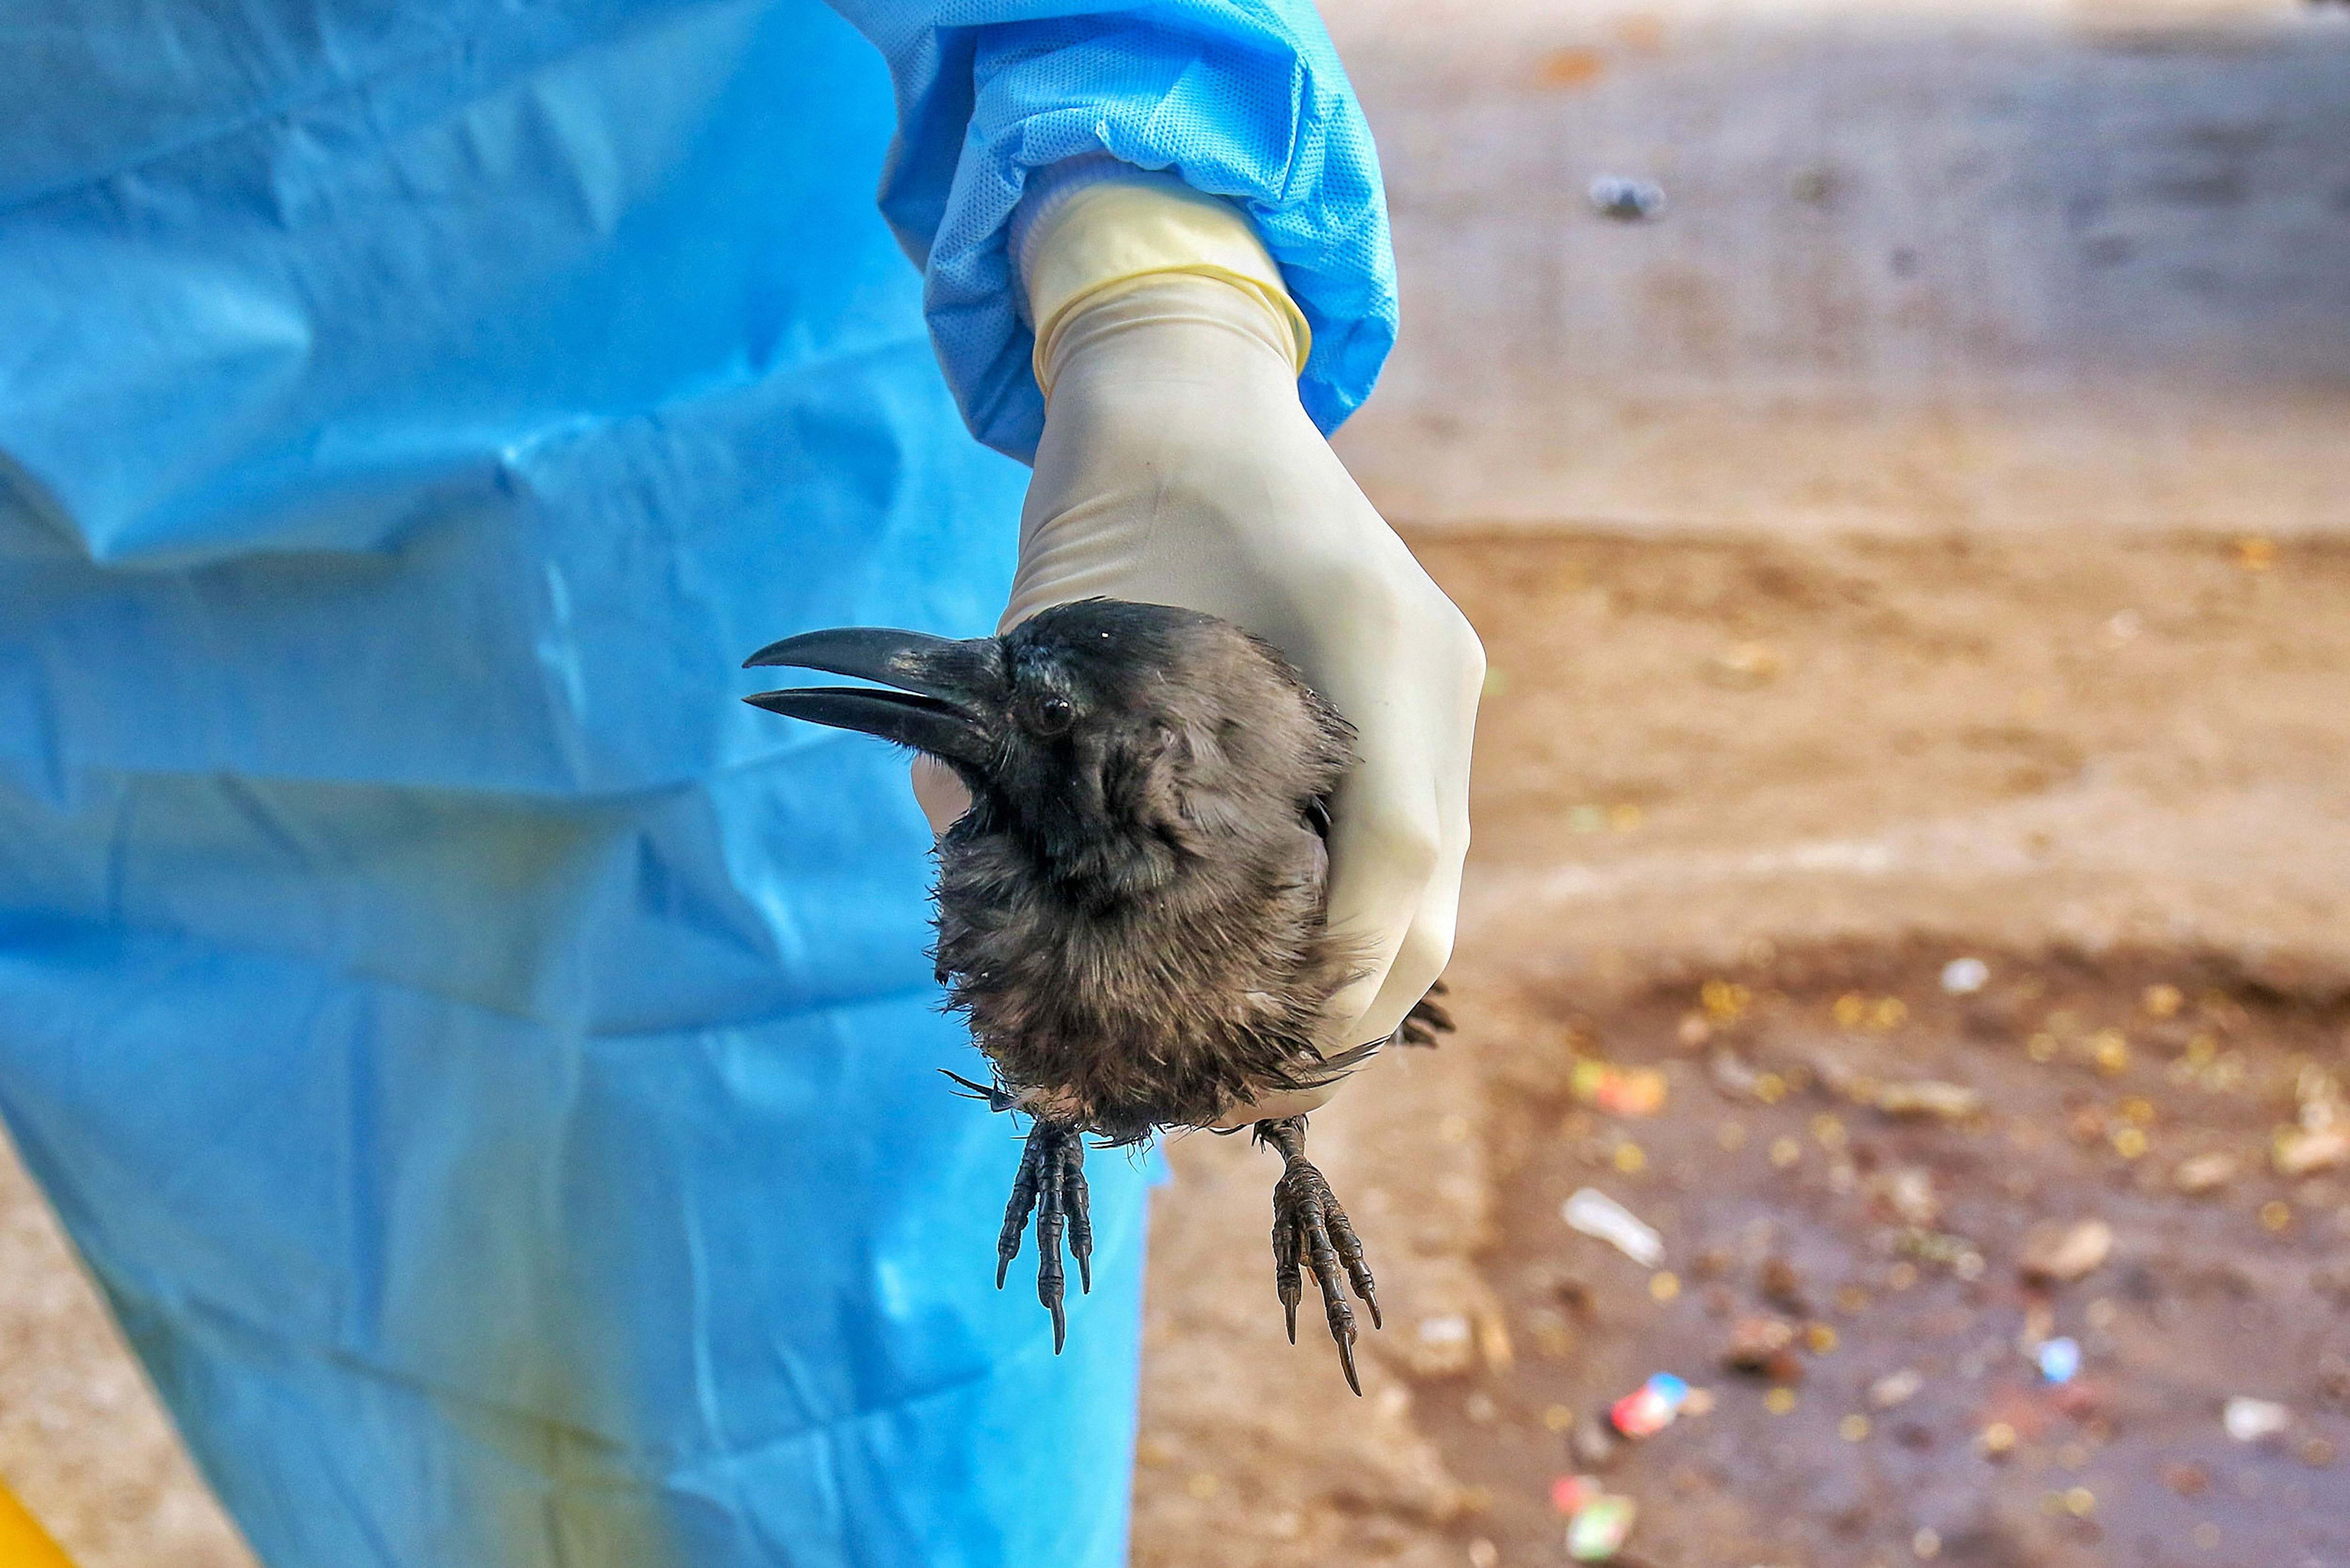  Forest department official picks a sick crow from a roadside near Jal Mahal in Jaipur, Tuesday, Jan. 5, 2021. A bird flu alert has been sounded in Rajasthan after the presence of the dreaded virus was confirmed in dead crows and other birds in Rajasthan. Credit: PTI Photo